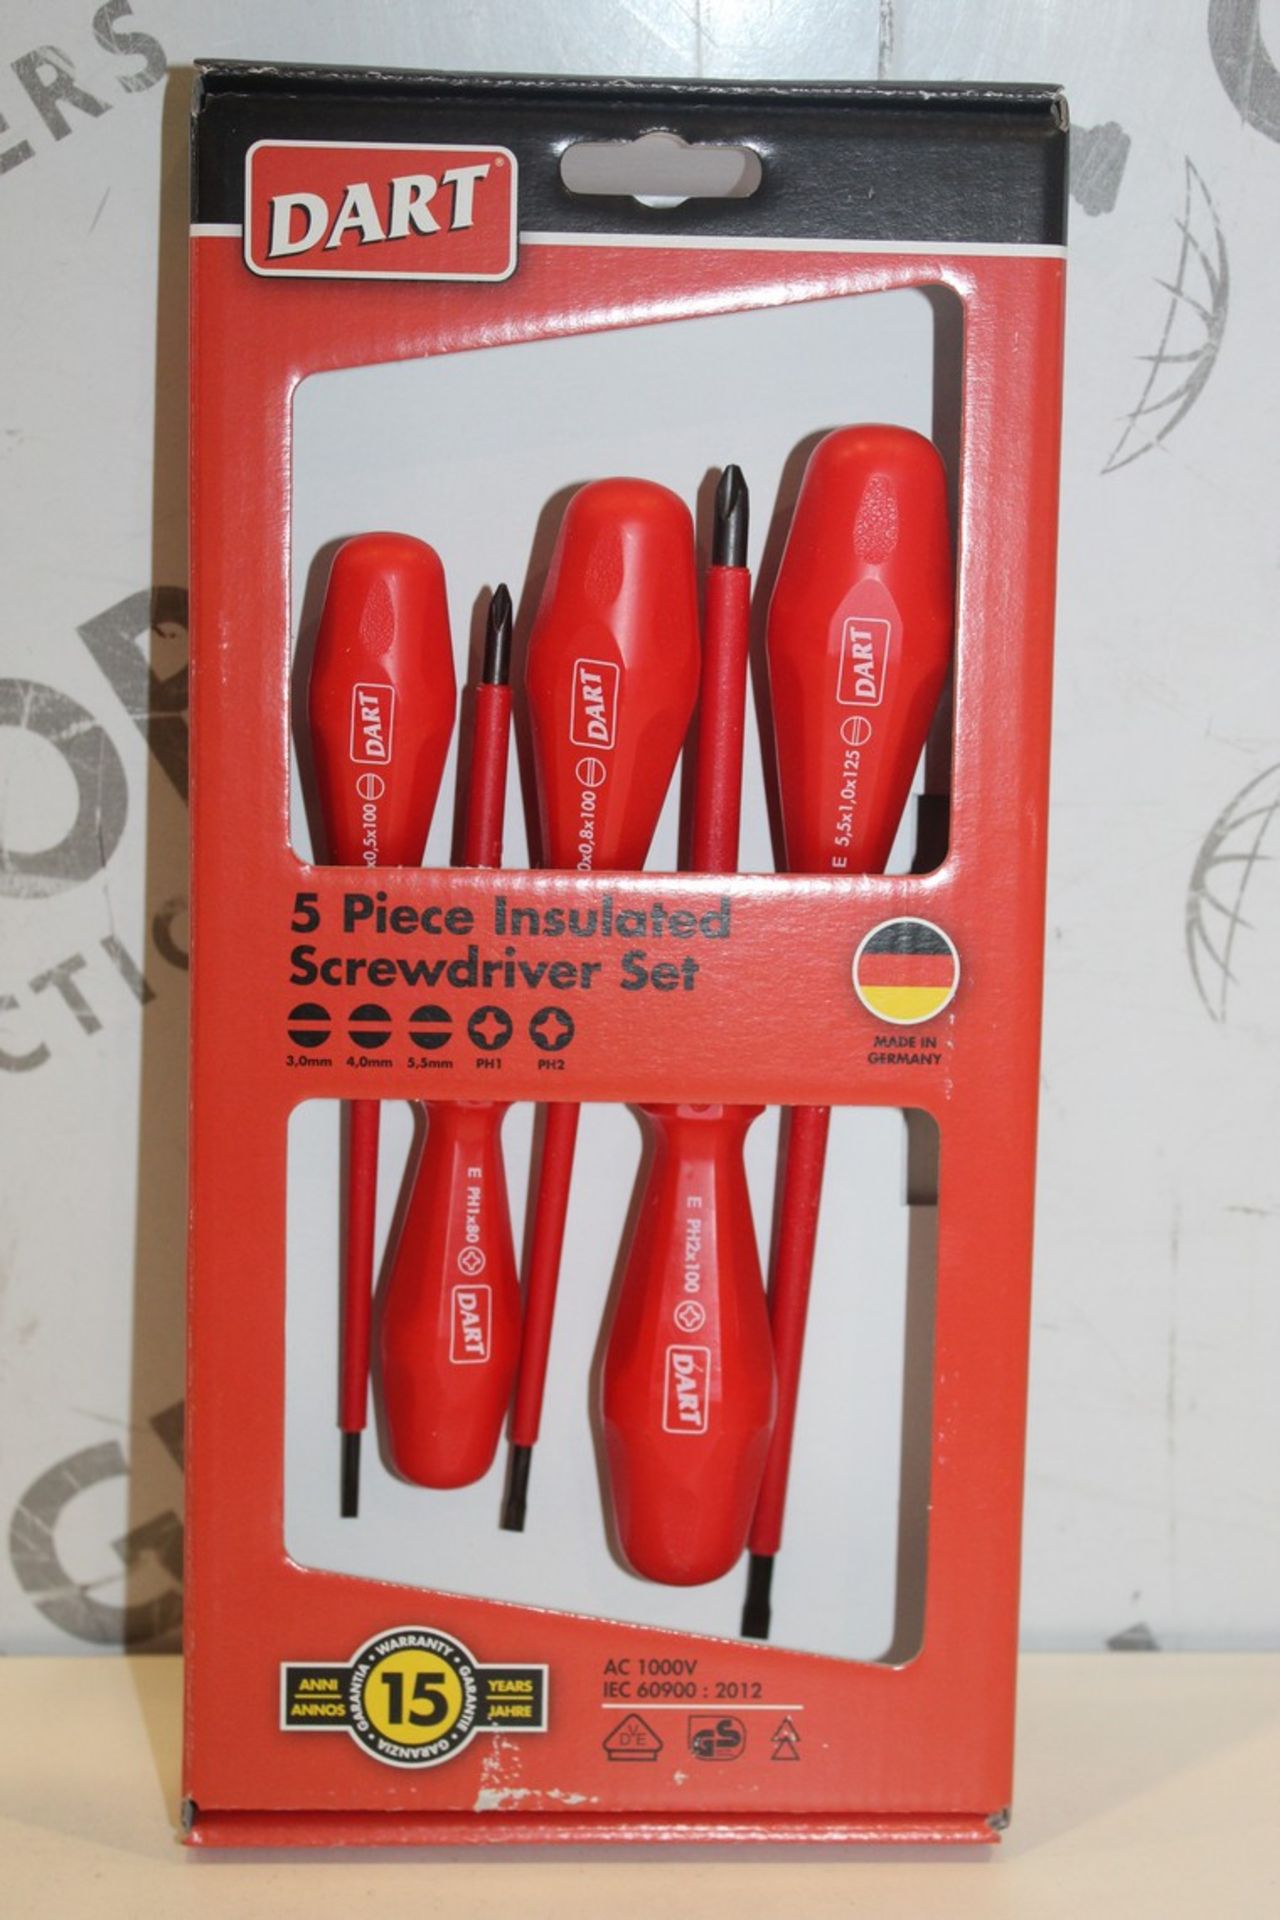 Insulated Screwdriver Set - Image 2 of 2